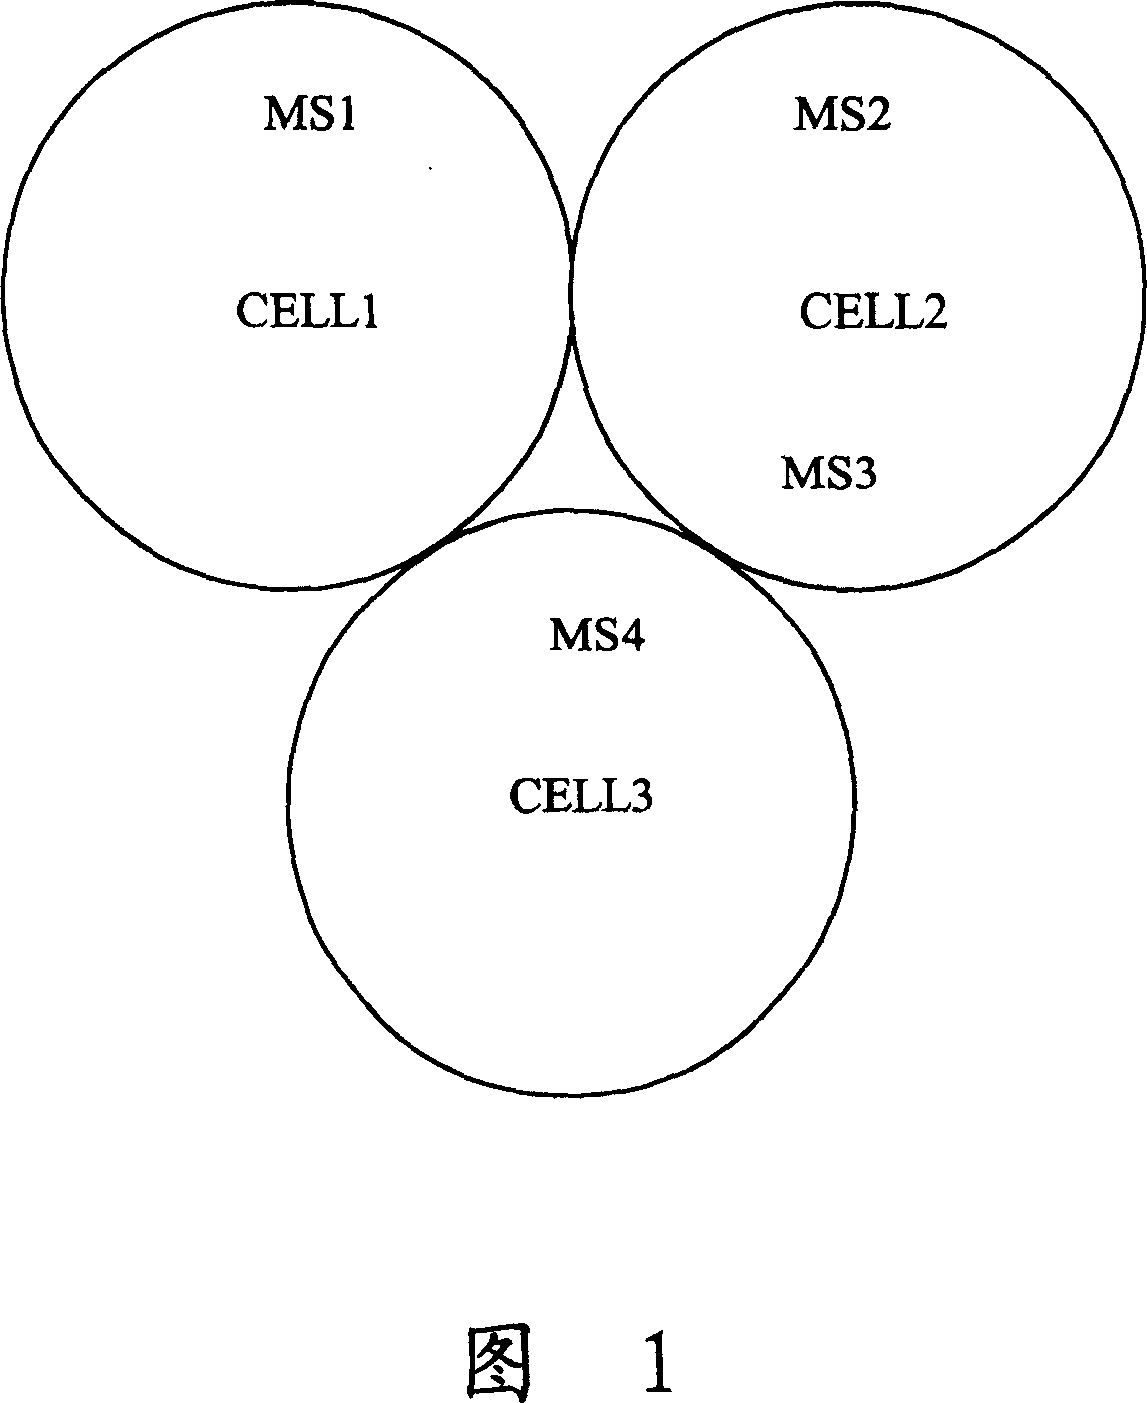 Resource allocating method for cellular cluster communication system